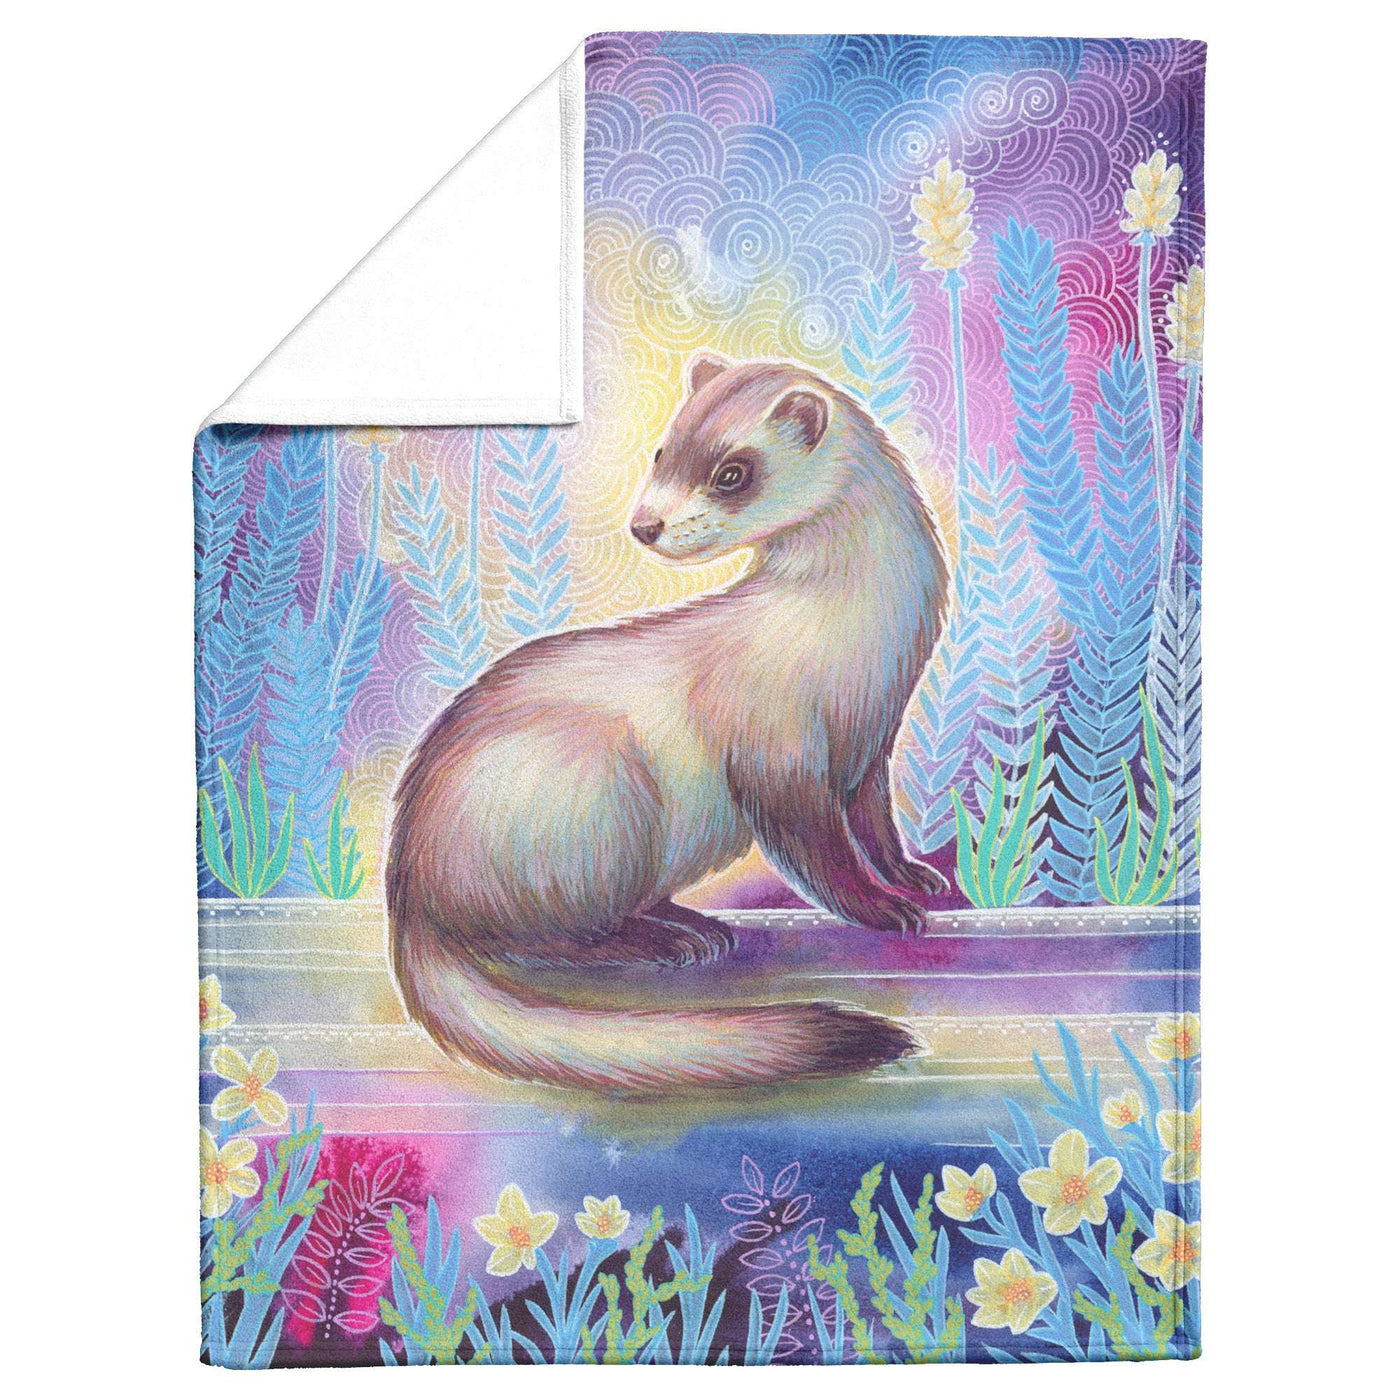 An illustrated Ferret Blanket featuring a stylized painting of a ferret sitting under a swirling sky with stylized flowers and patterns.